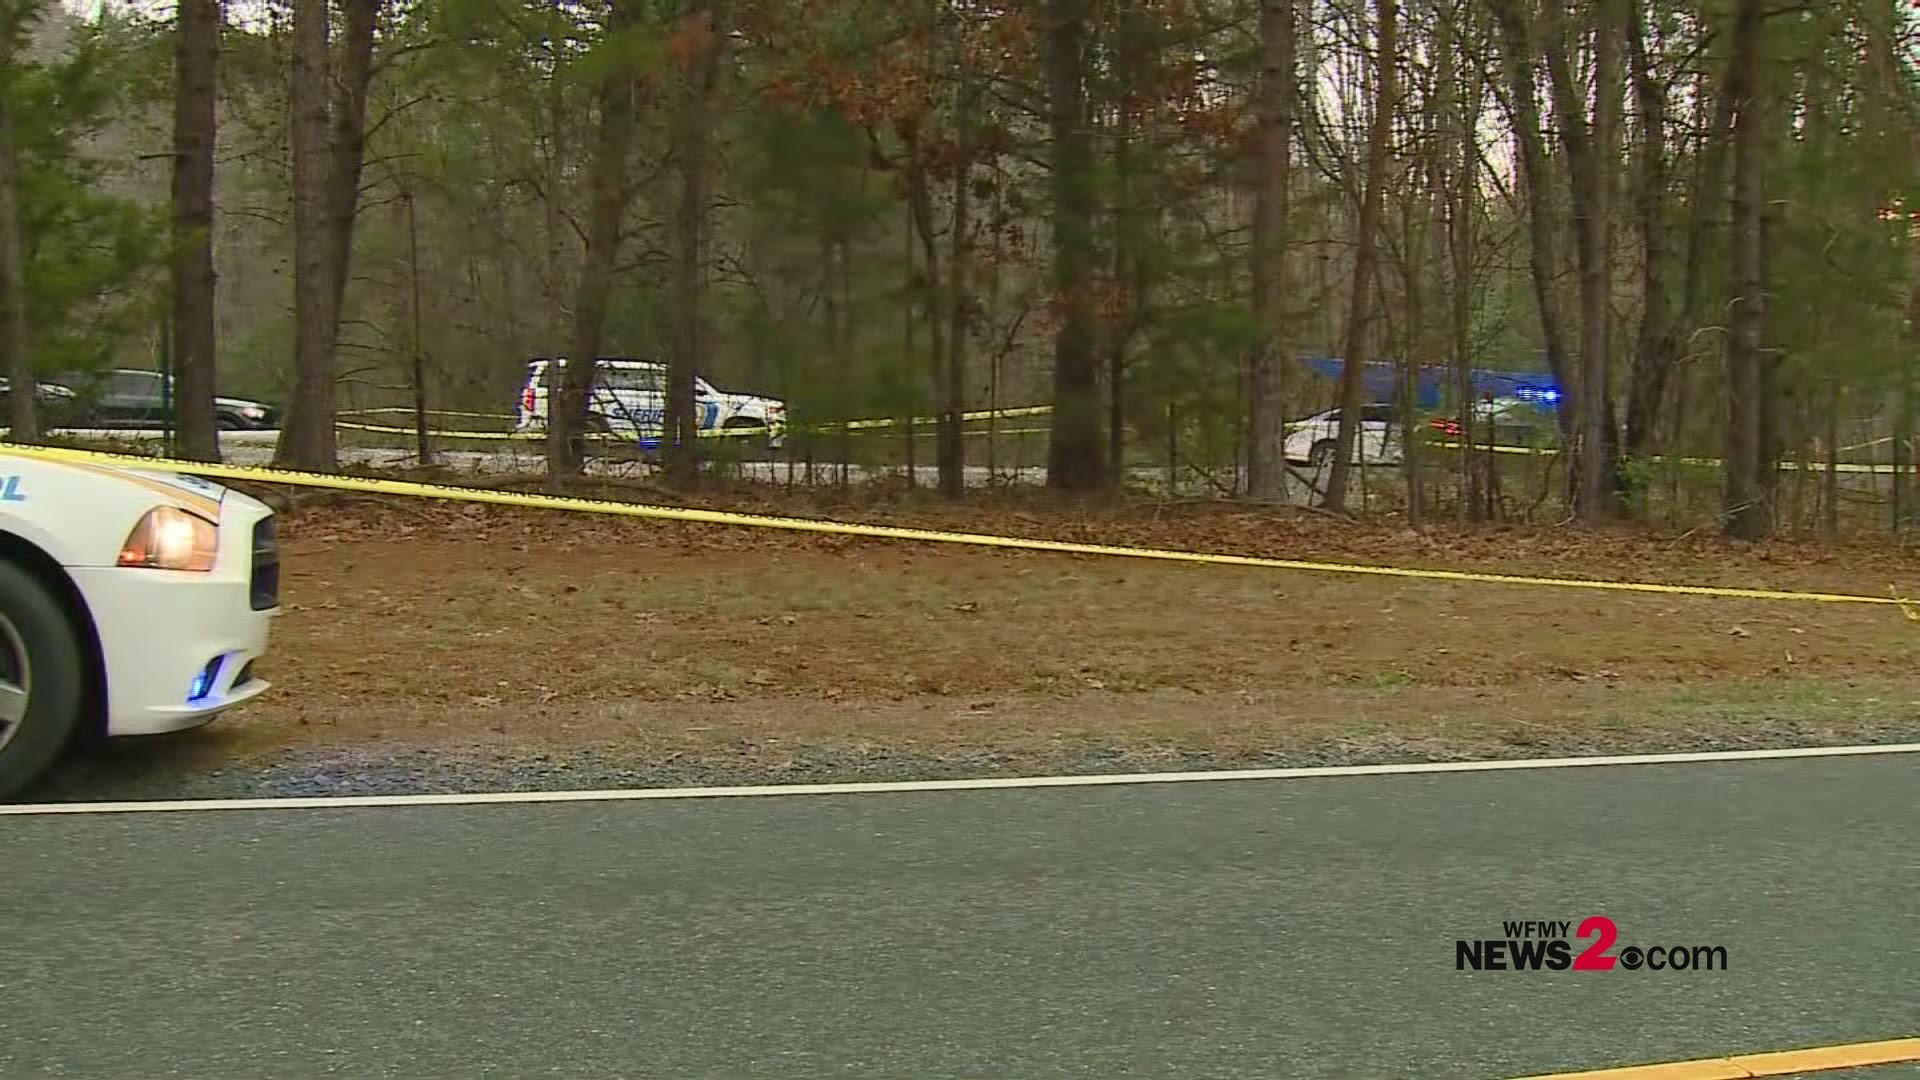 A man has been pronounced dead at the scene of a crime, after a chase that ended this morning near North Carolina Zoo.